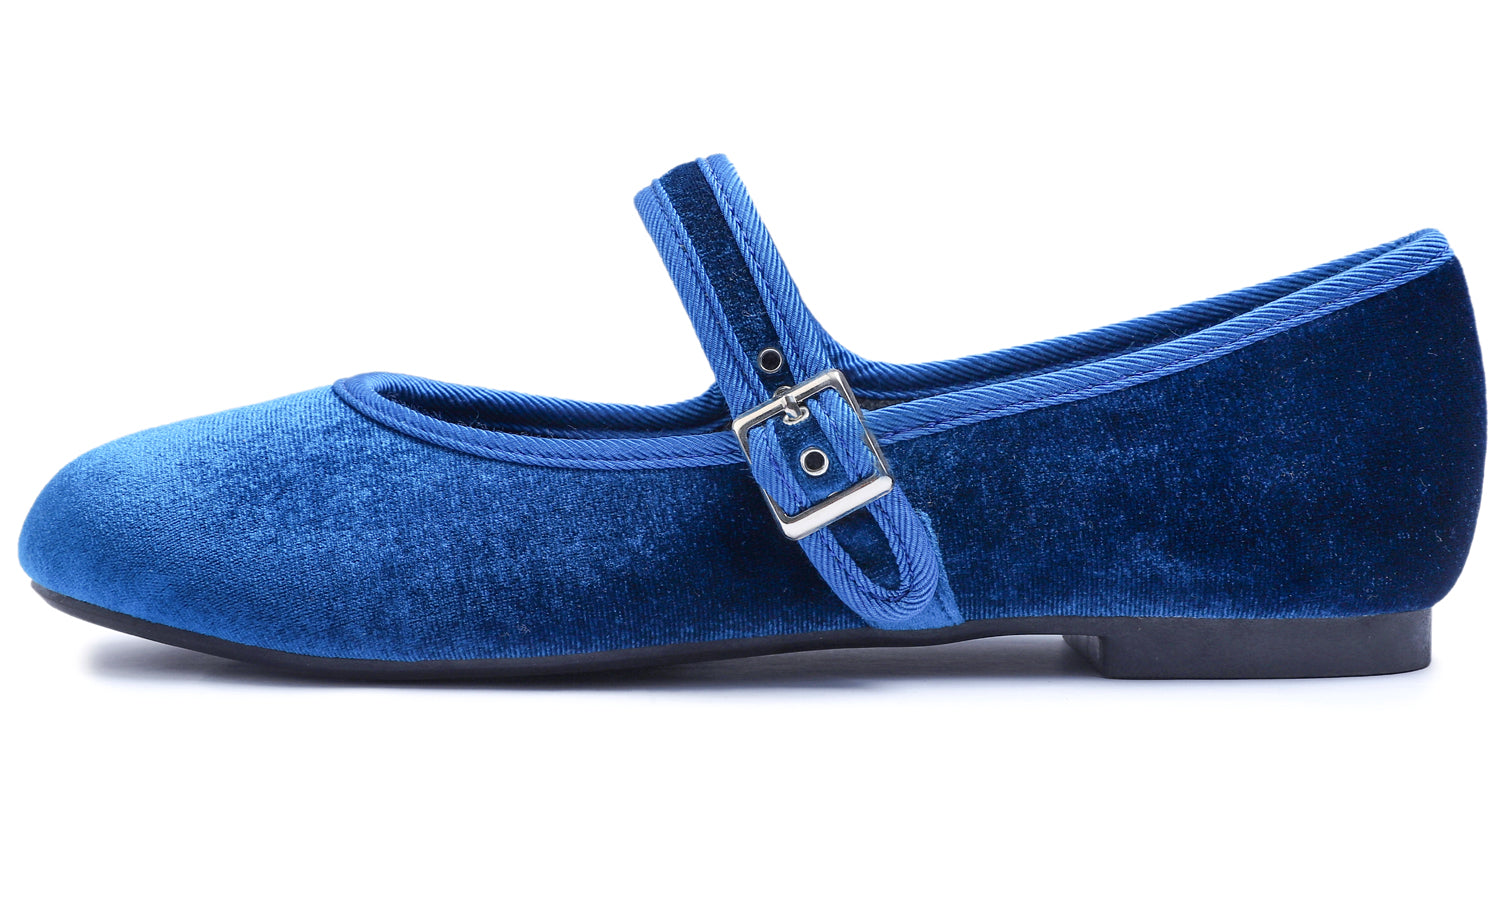 Feversole Women's Soft Cushion Extra Padded Comfort Round Toe Mary Jane Metal Buckle Fashion Ballet Flats Walking Shoes Peacock Blue Velvet